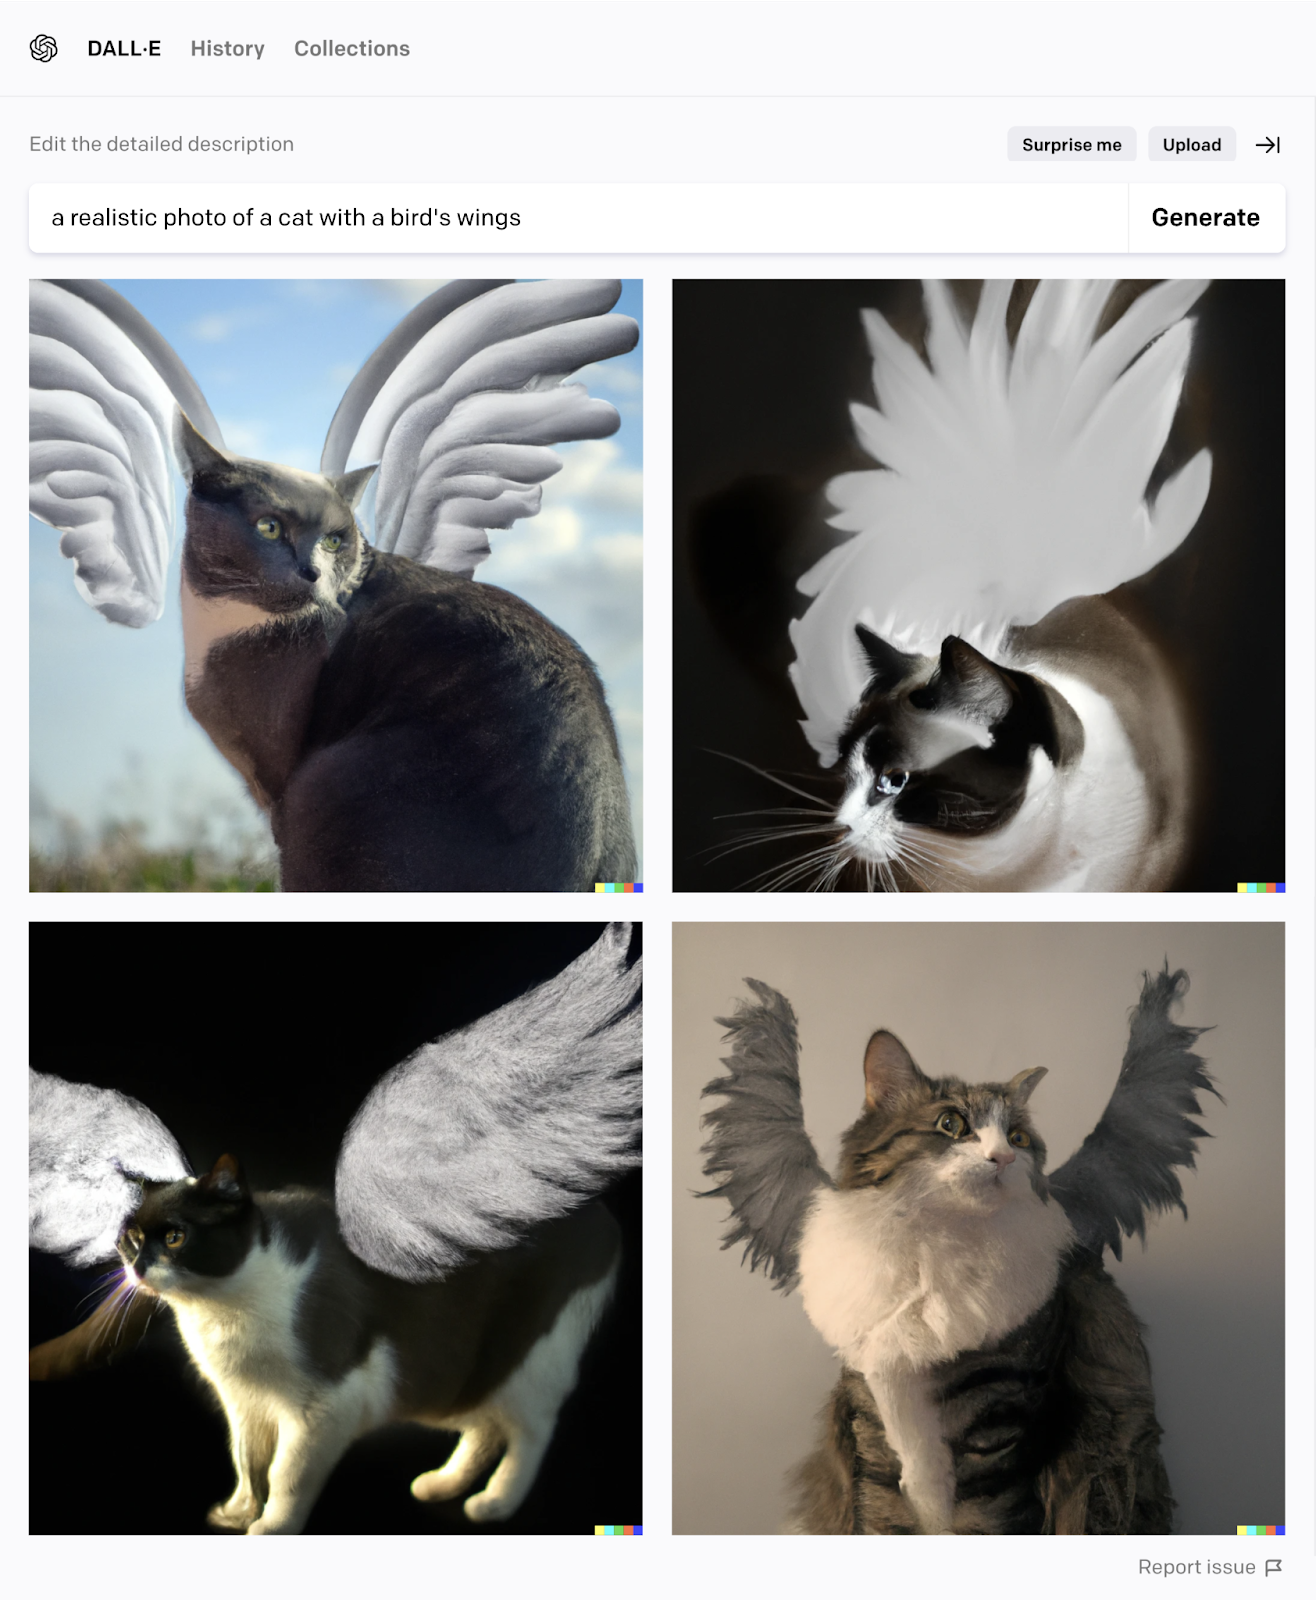 DALL-E results for “A realistic photo of a cat with a bird’s wings” prompt